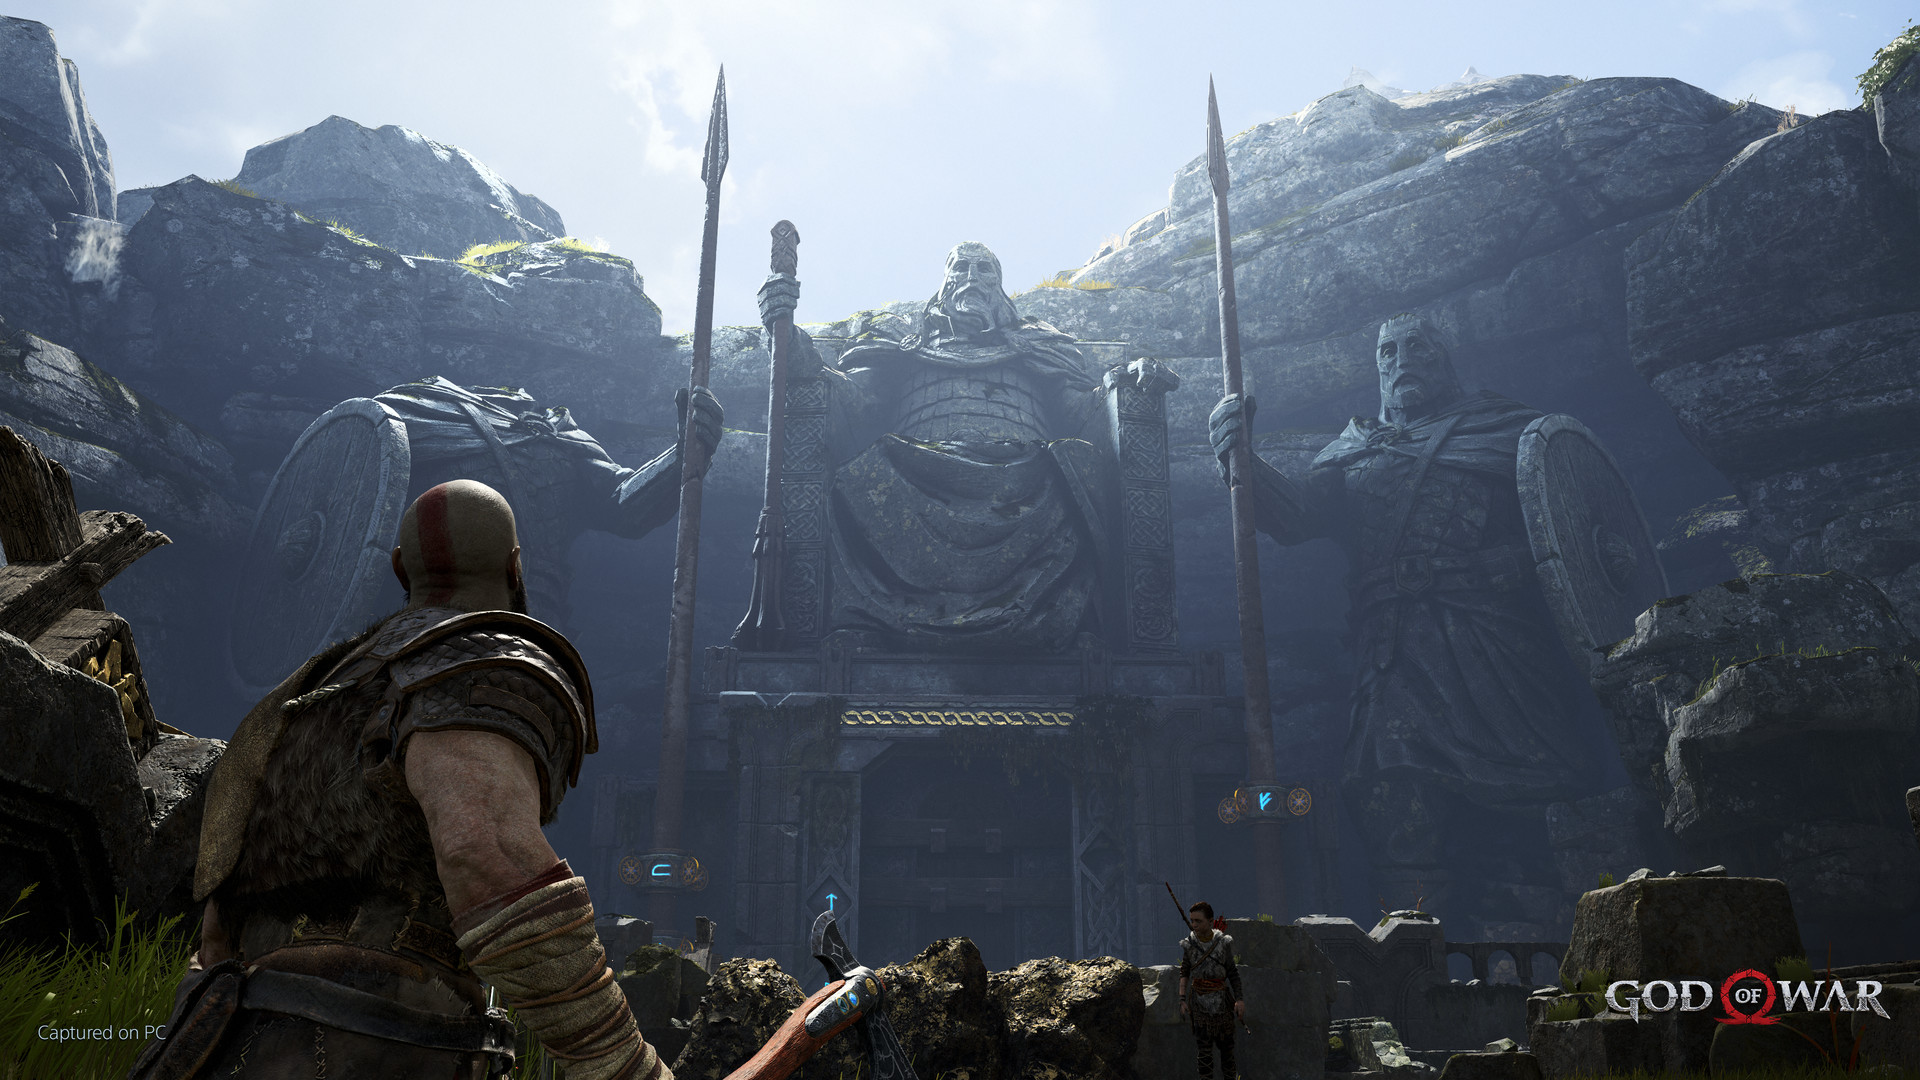 5 things to know before playing God of War on PC